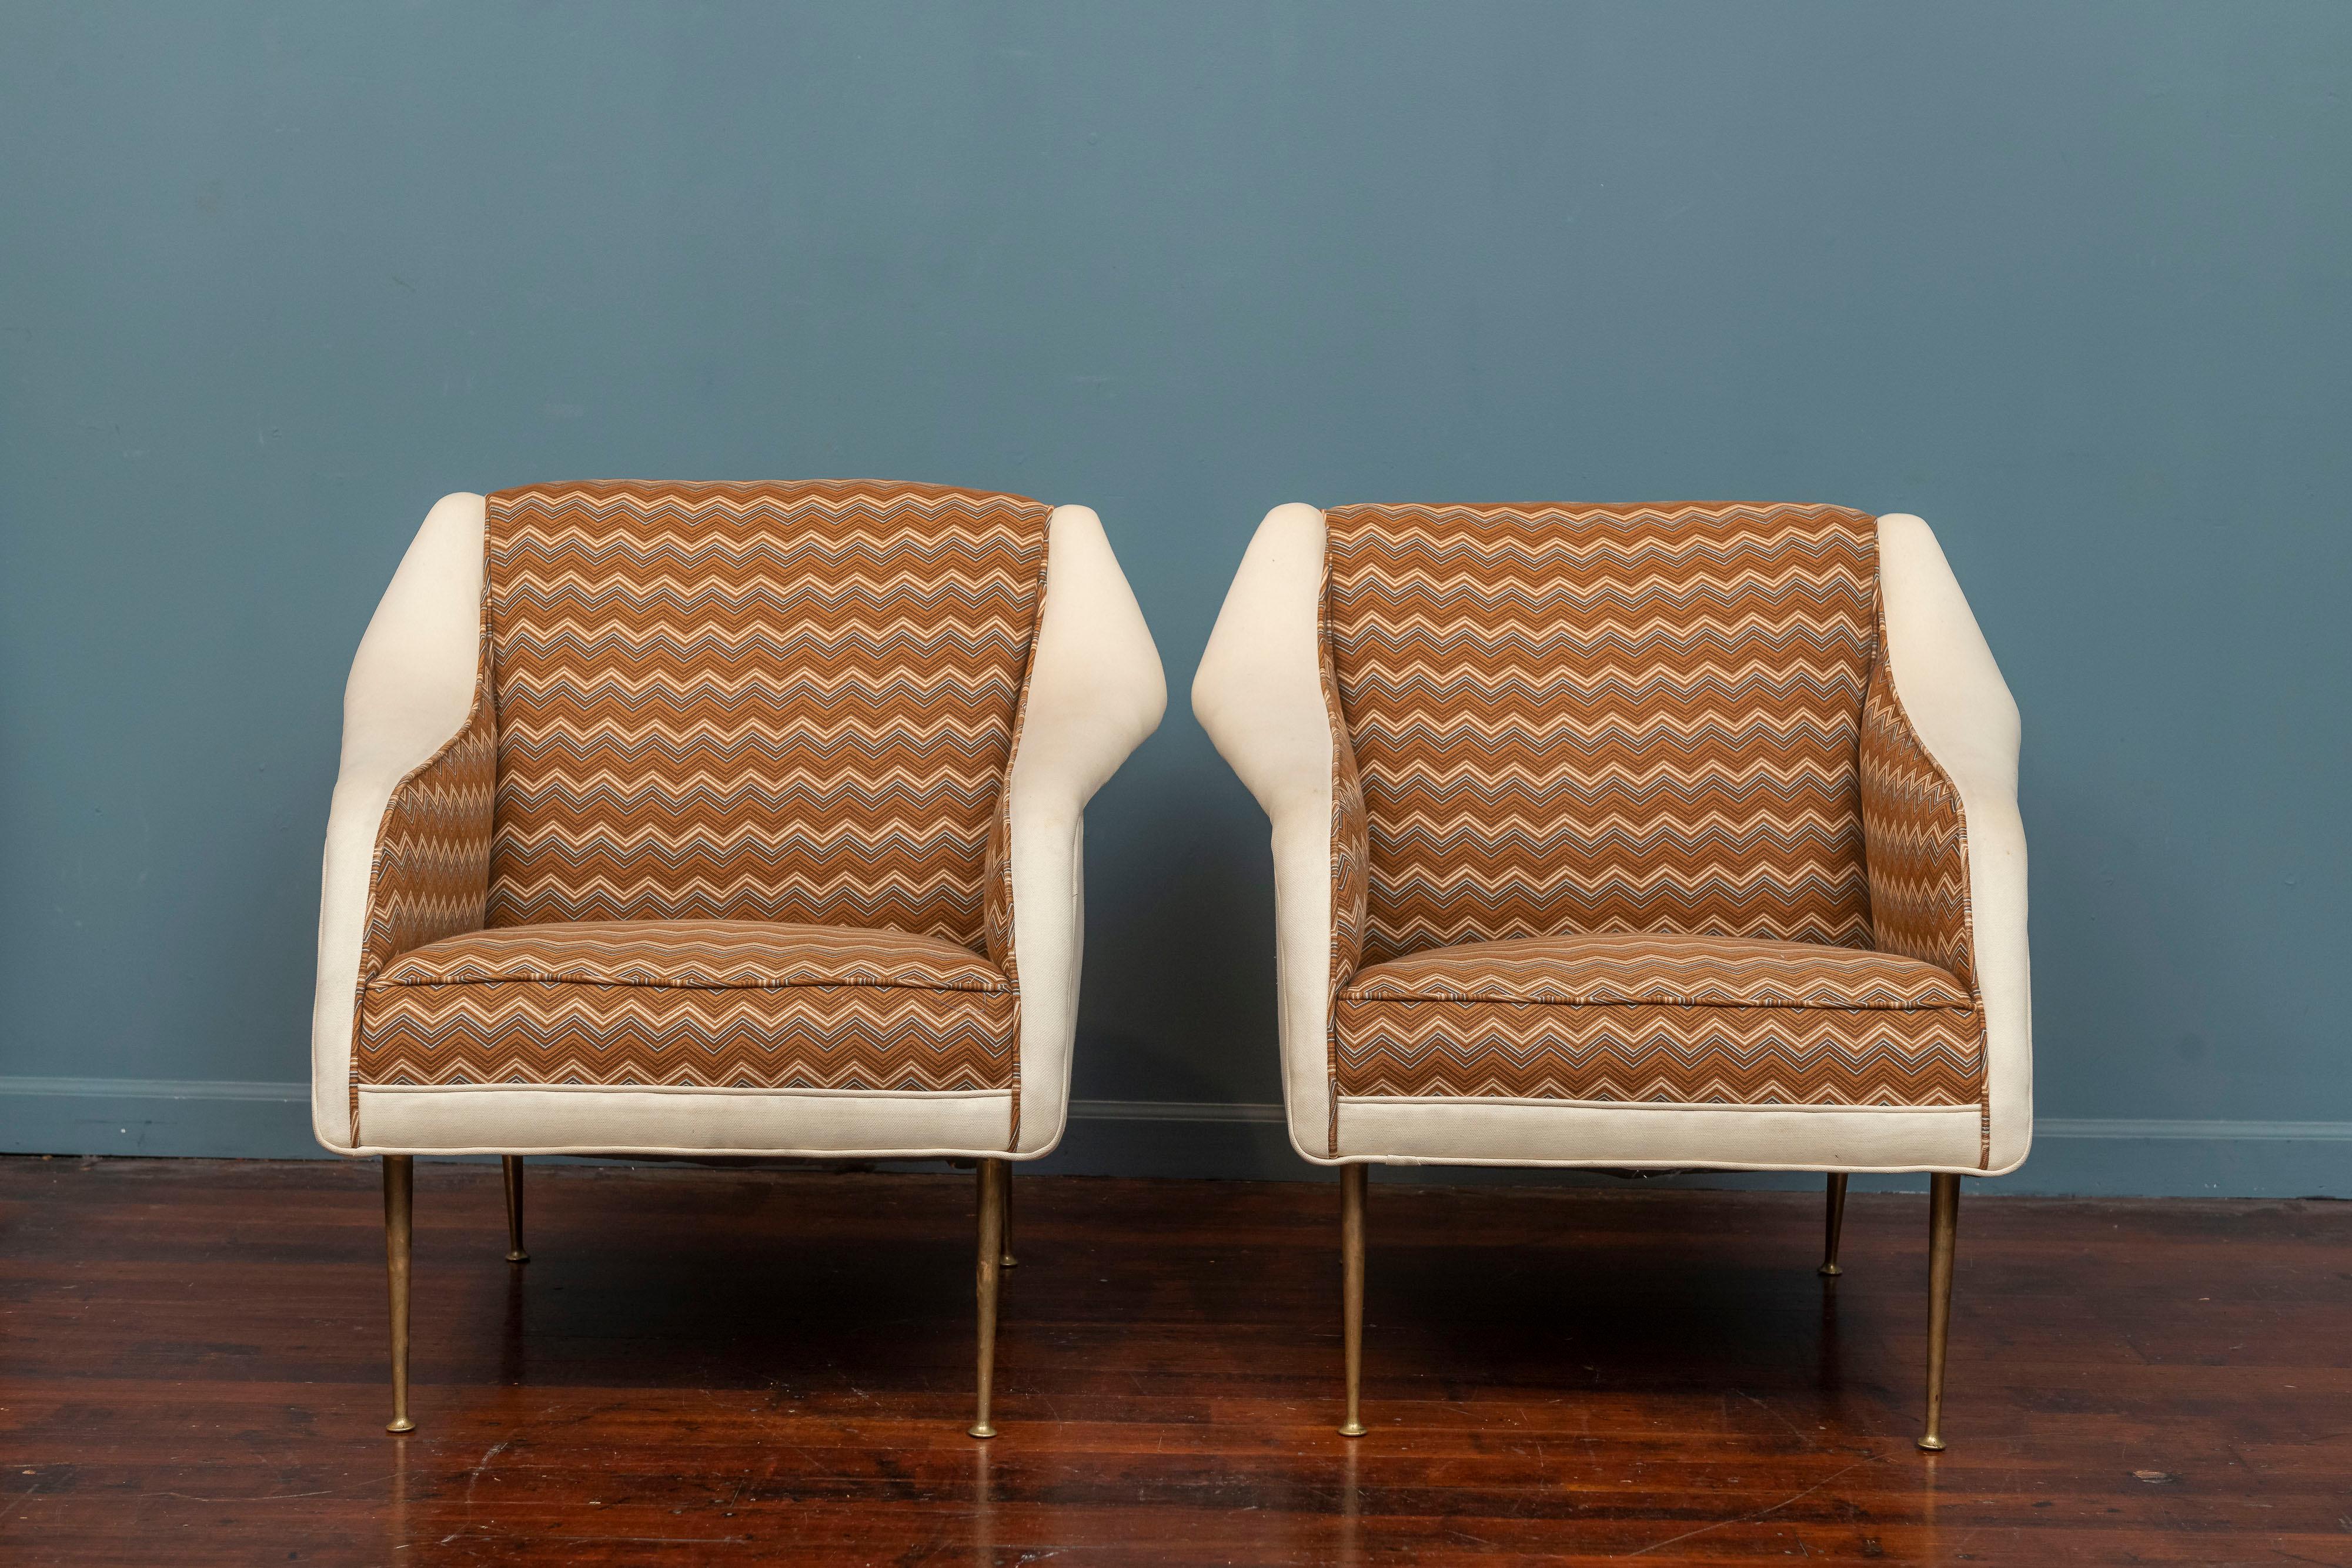 Carlo de Carli design lounge chairs for M.Singer & Sons, Model 802. Sophisticated looking chairs with stiletto brass legs and curvaceous arms that is beautiful from all angles. The fabric is an older redo that is usable as-is and very comfortable